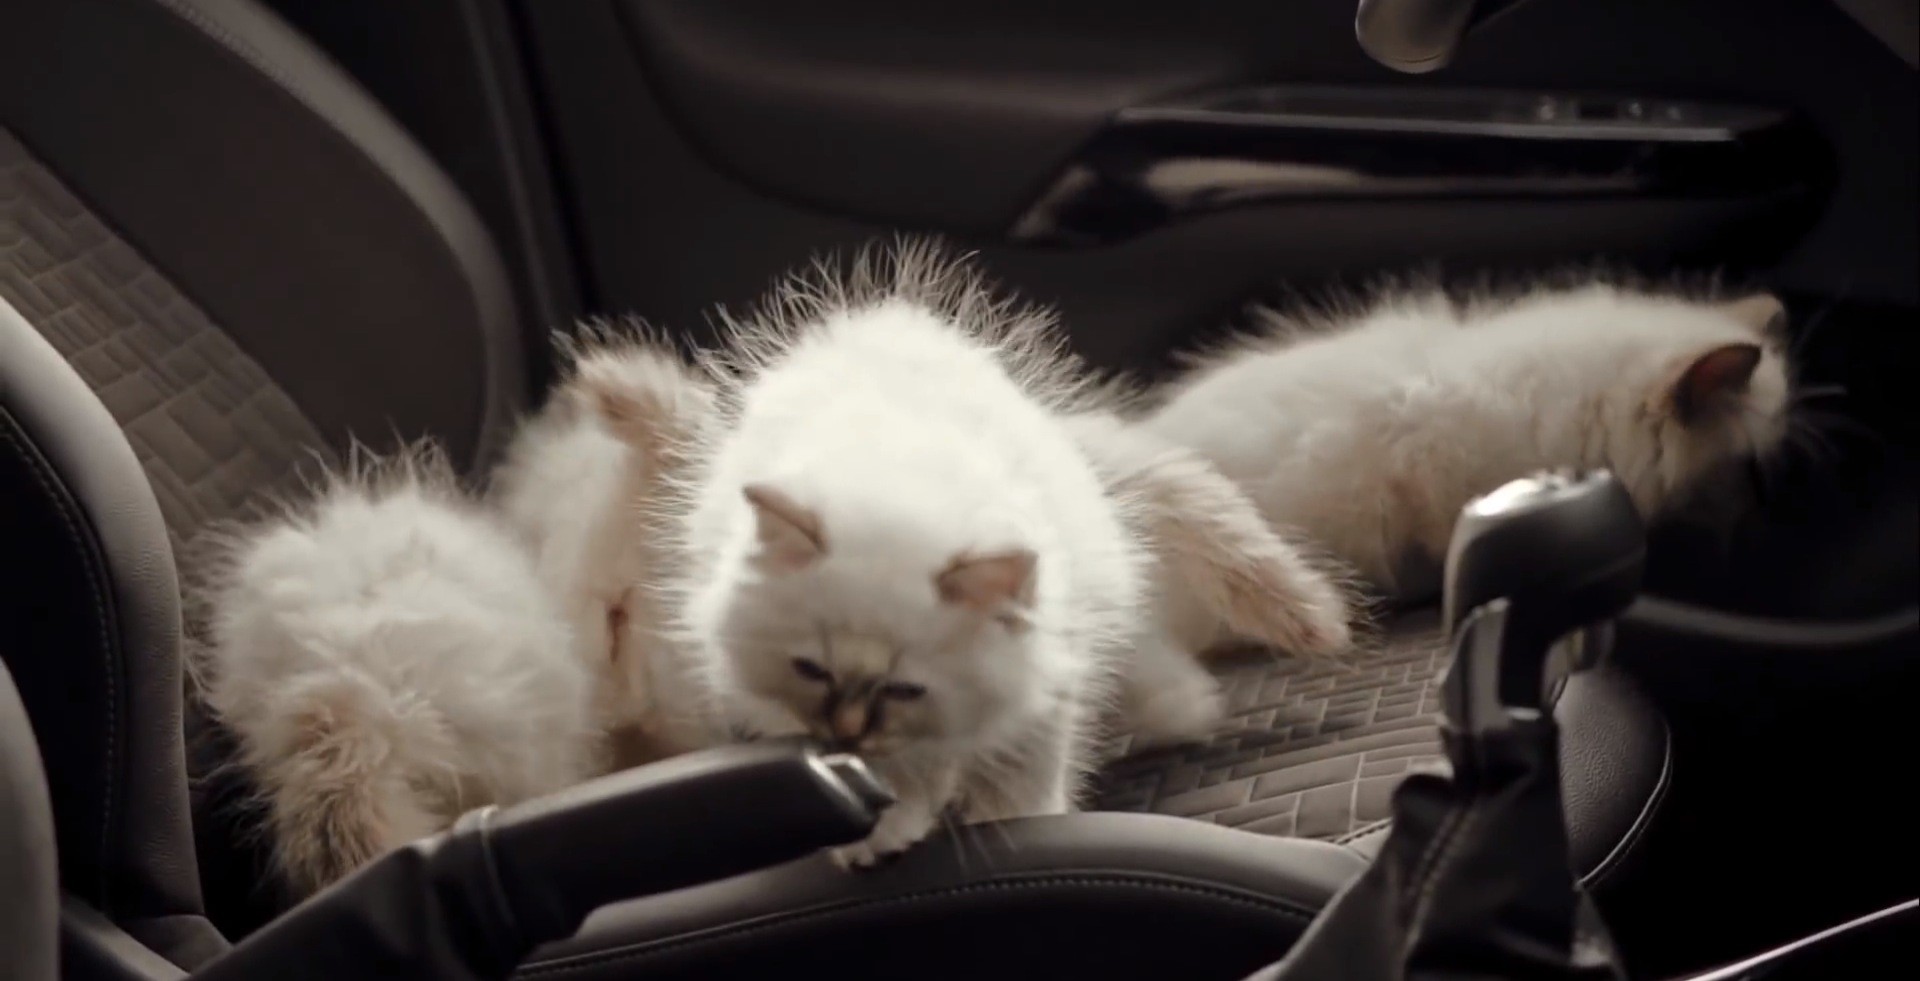 opel-stuffs-many-adorable-kittens-into-a-car-corsa-ad-video_3.jpg